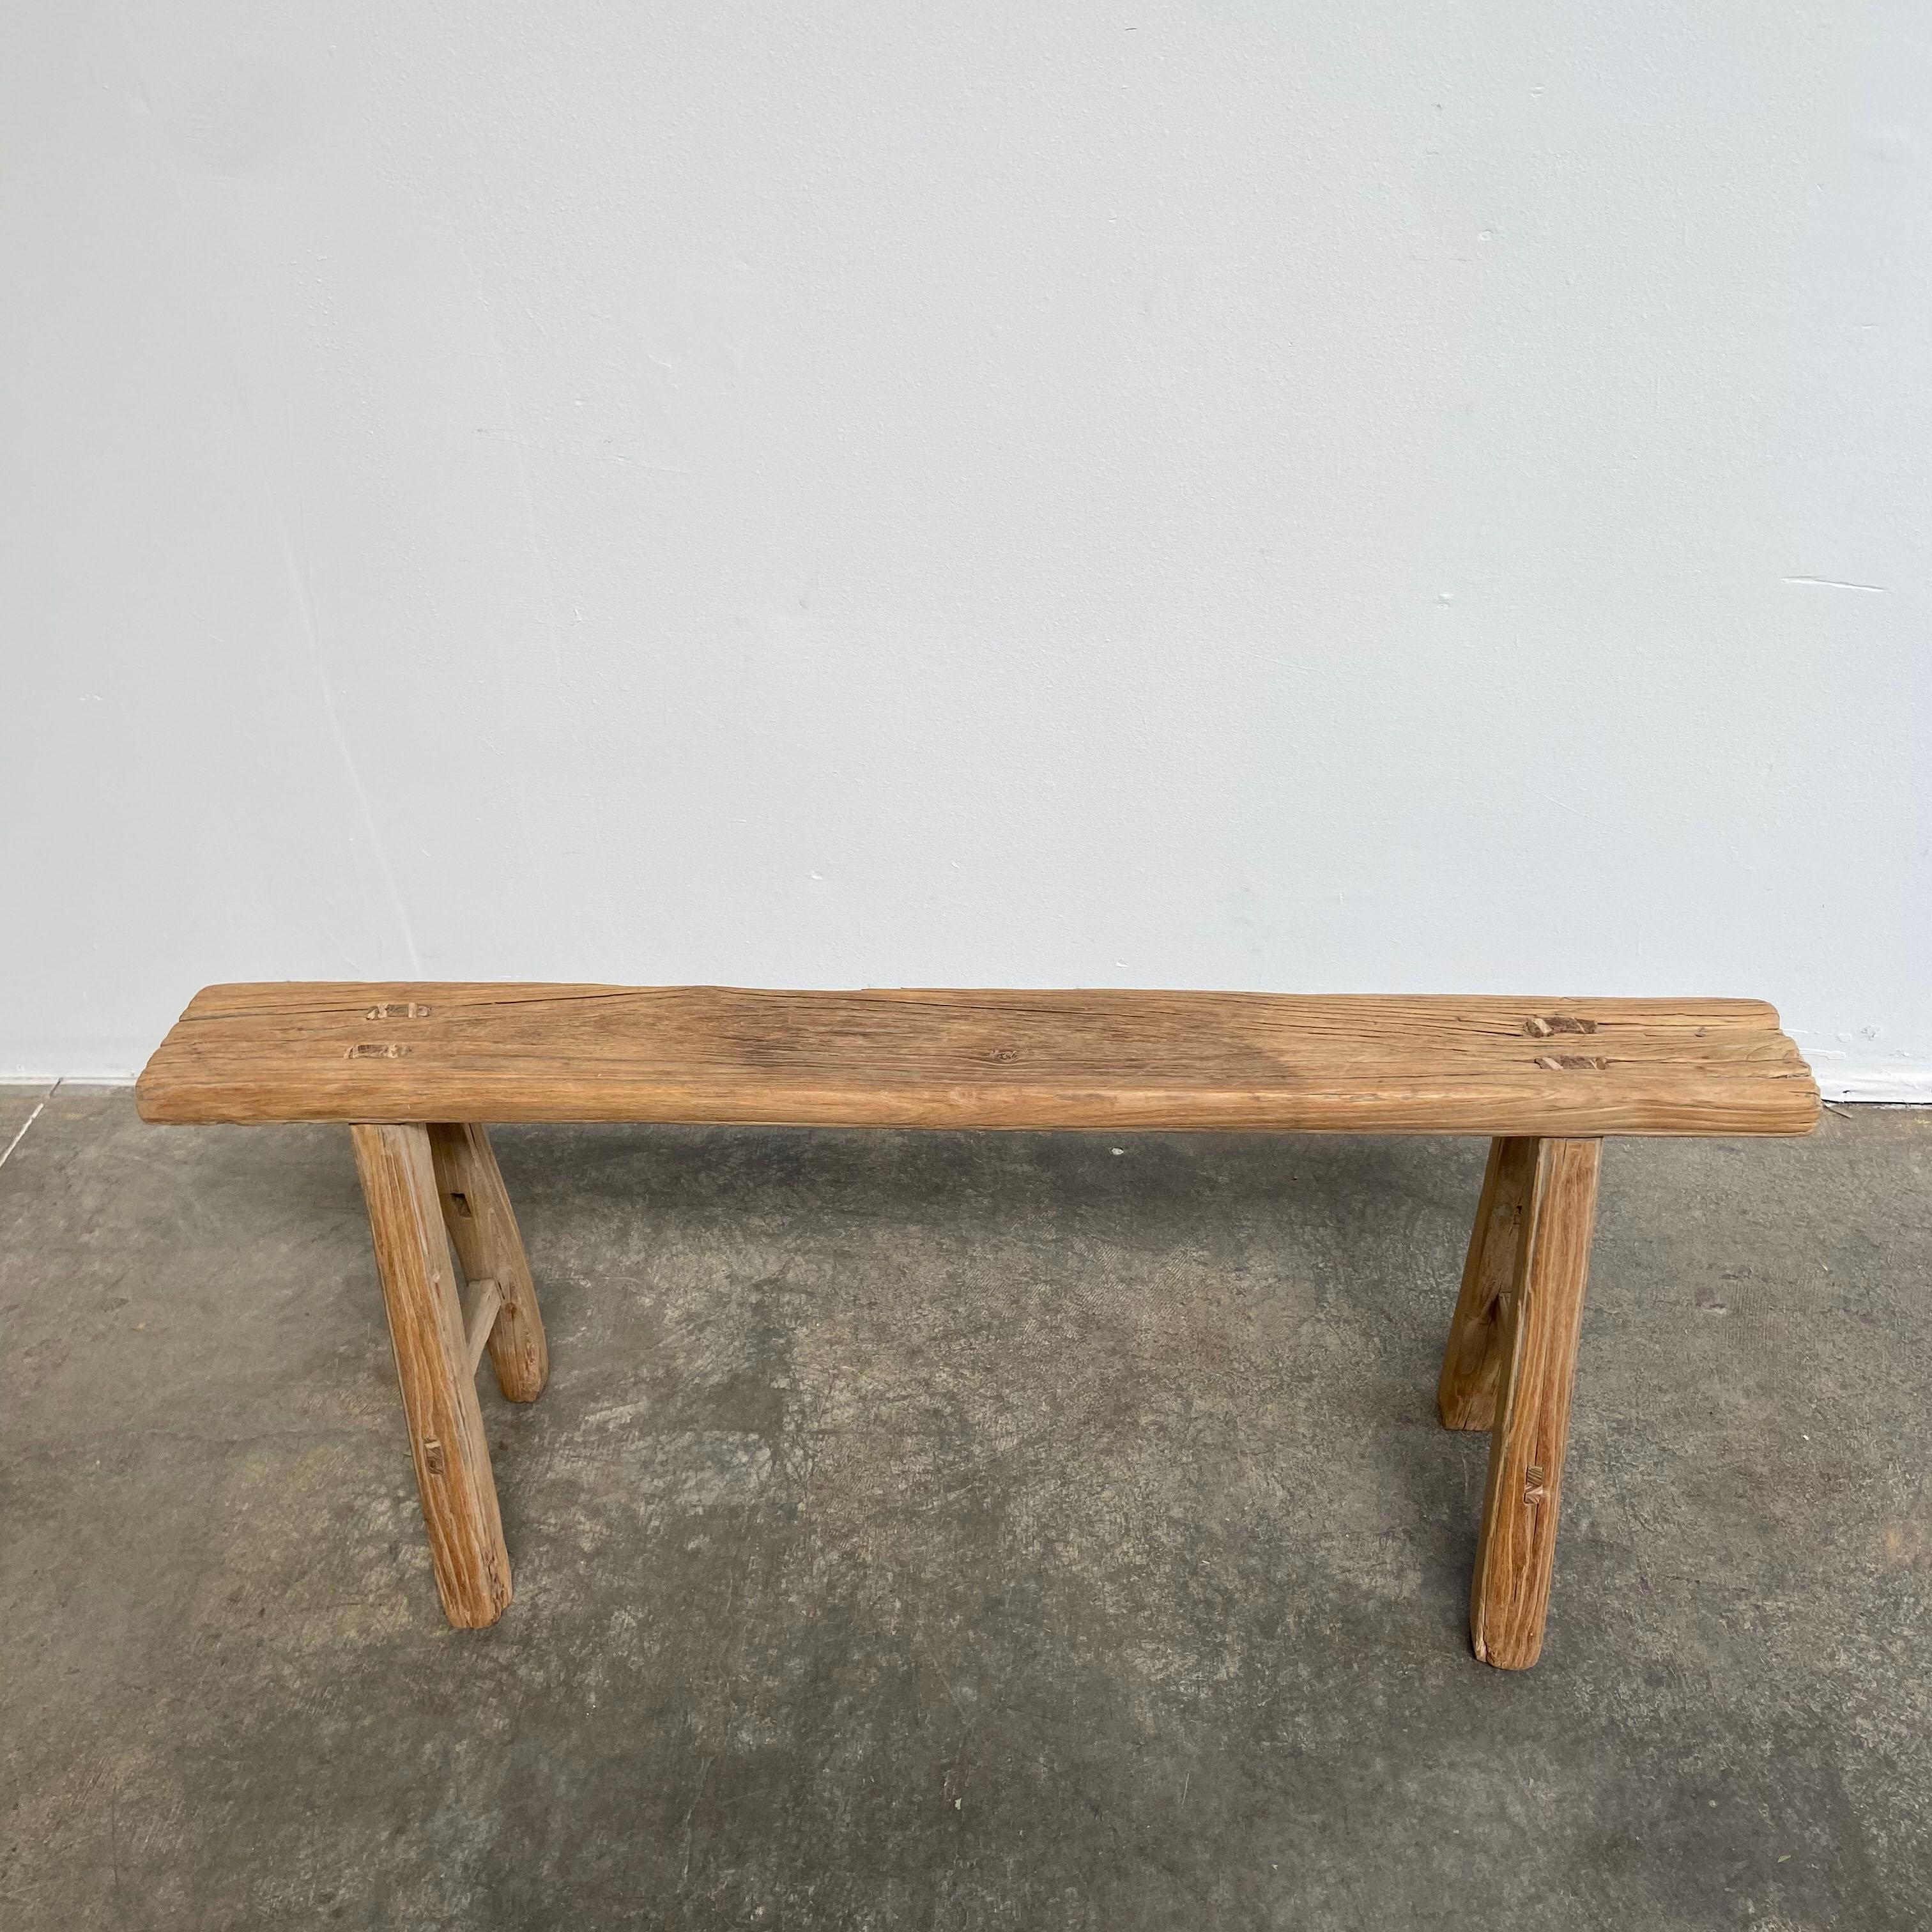 Skinny bench /vintage antique elm wood bench.
These are the real vintage antique elm wood benches! Beautiful antique patina, with weathering and age, these are solid and sturdy ready for daily use, use as a table behind a sofa, stool, coffee table,